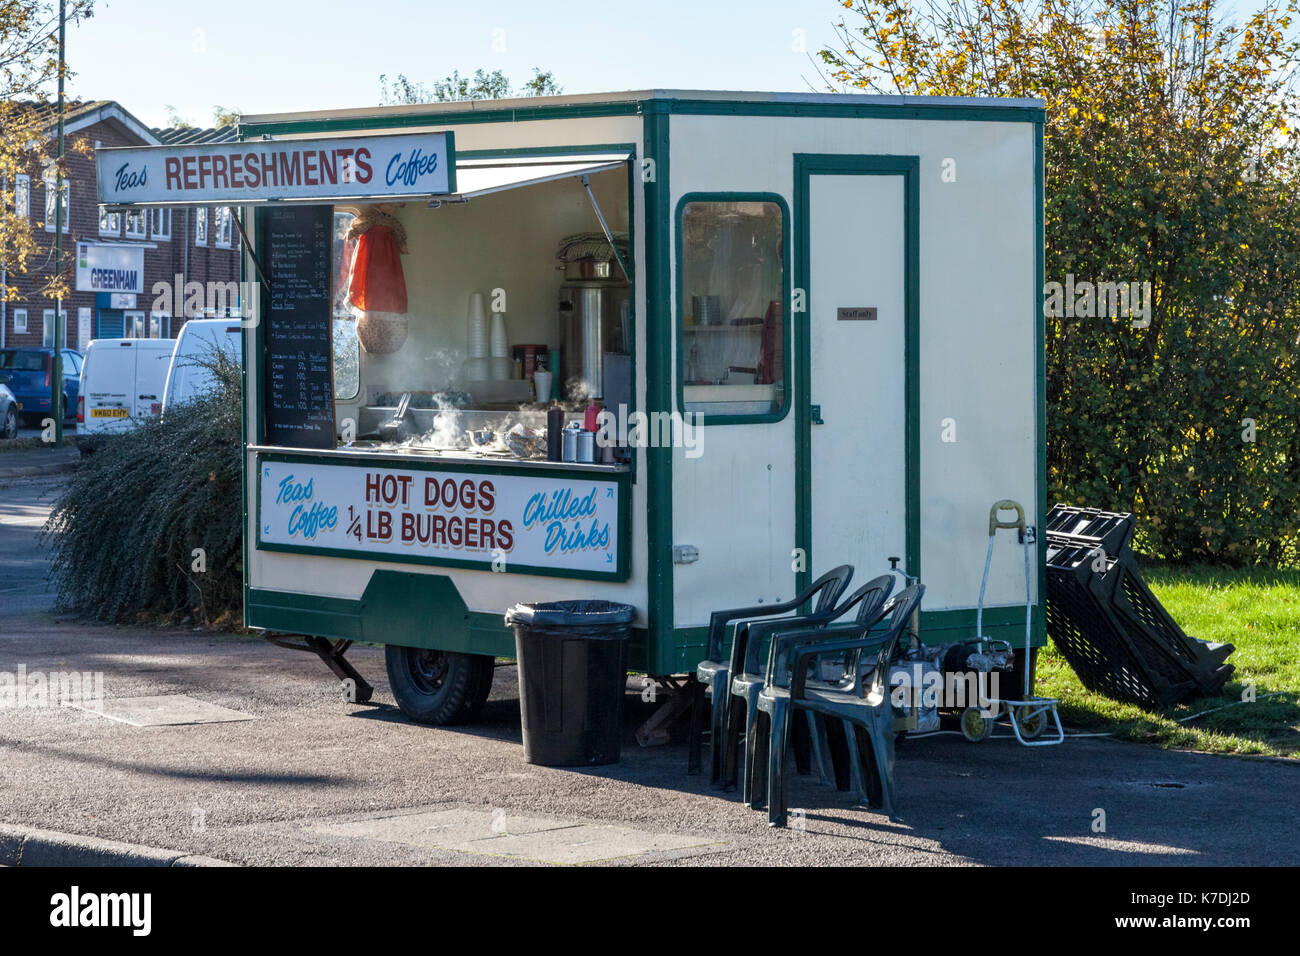 Roadside catering: mobile refreshment trailer selling hot food, drinks and other refreshments on a street in Nottingham, England, UK Stock Photo